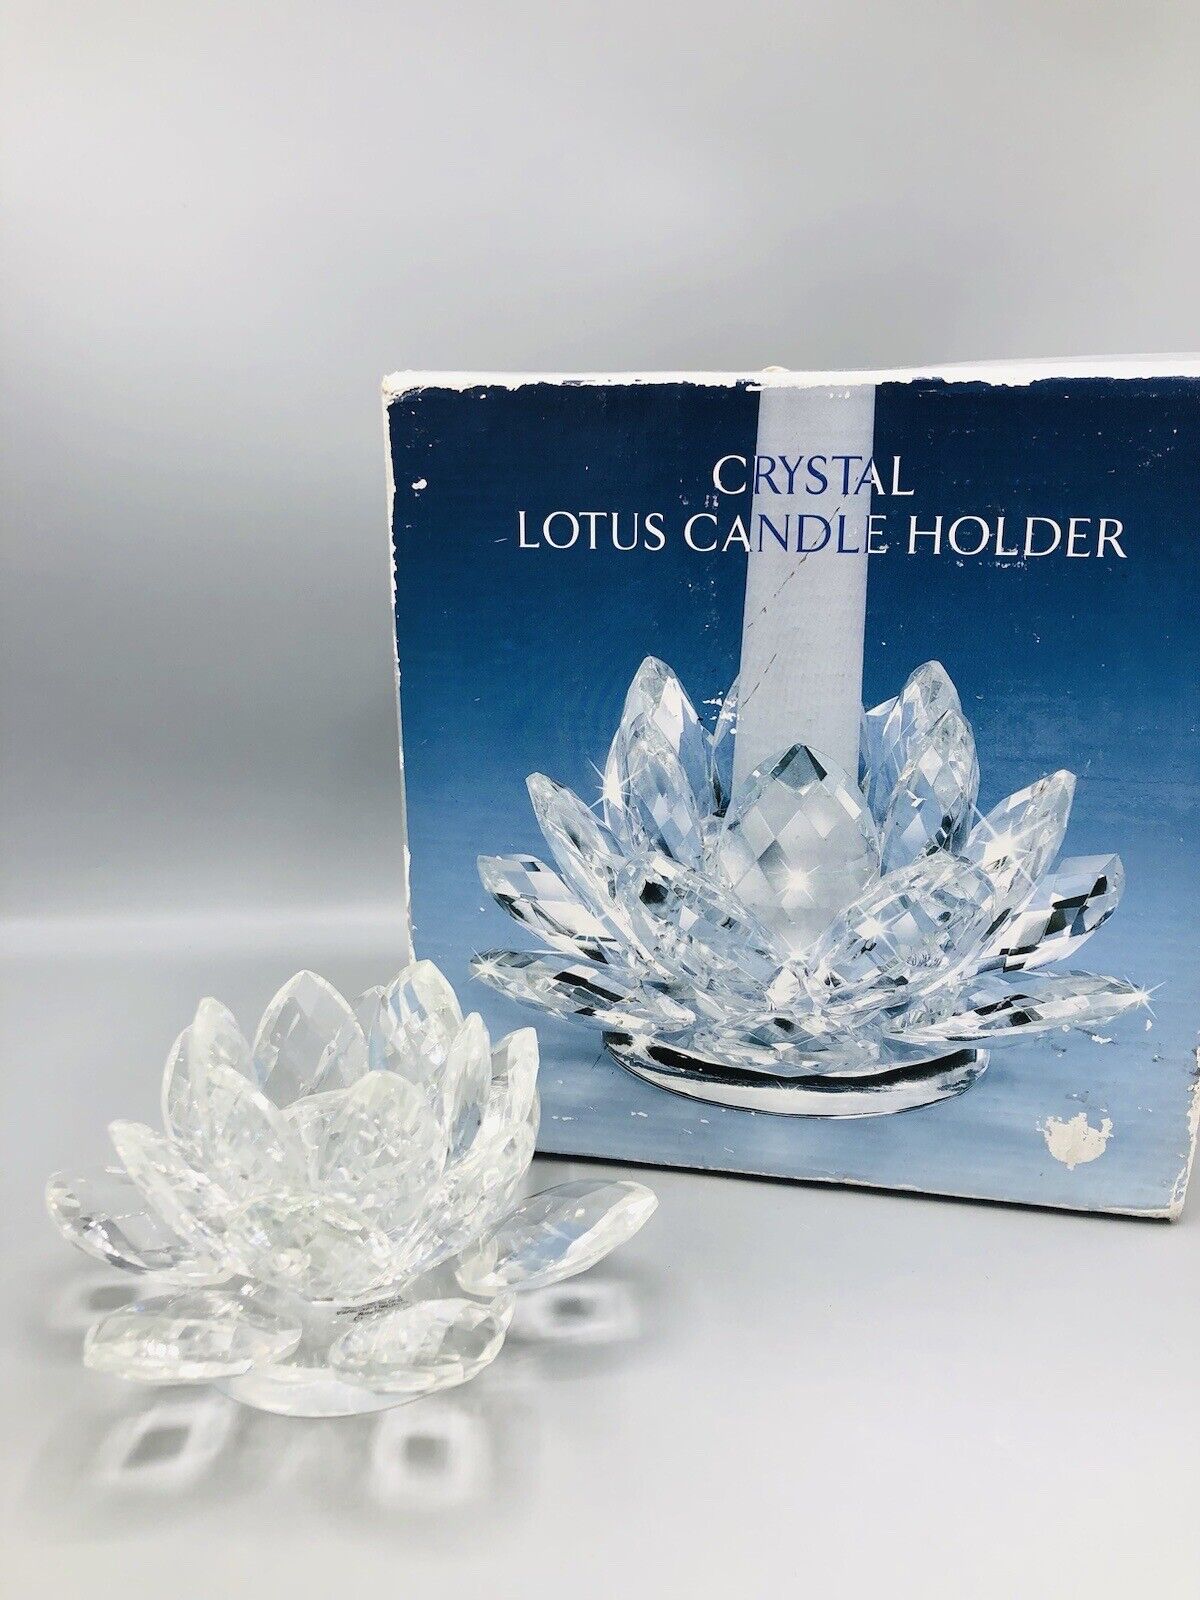 NIB Shannon Crystal Lotus Candle Holder by Godinger #15590 Hand Crafted, Ireland